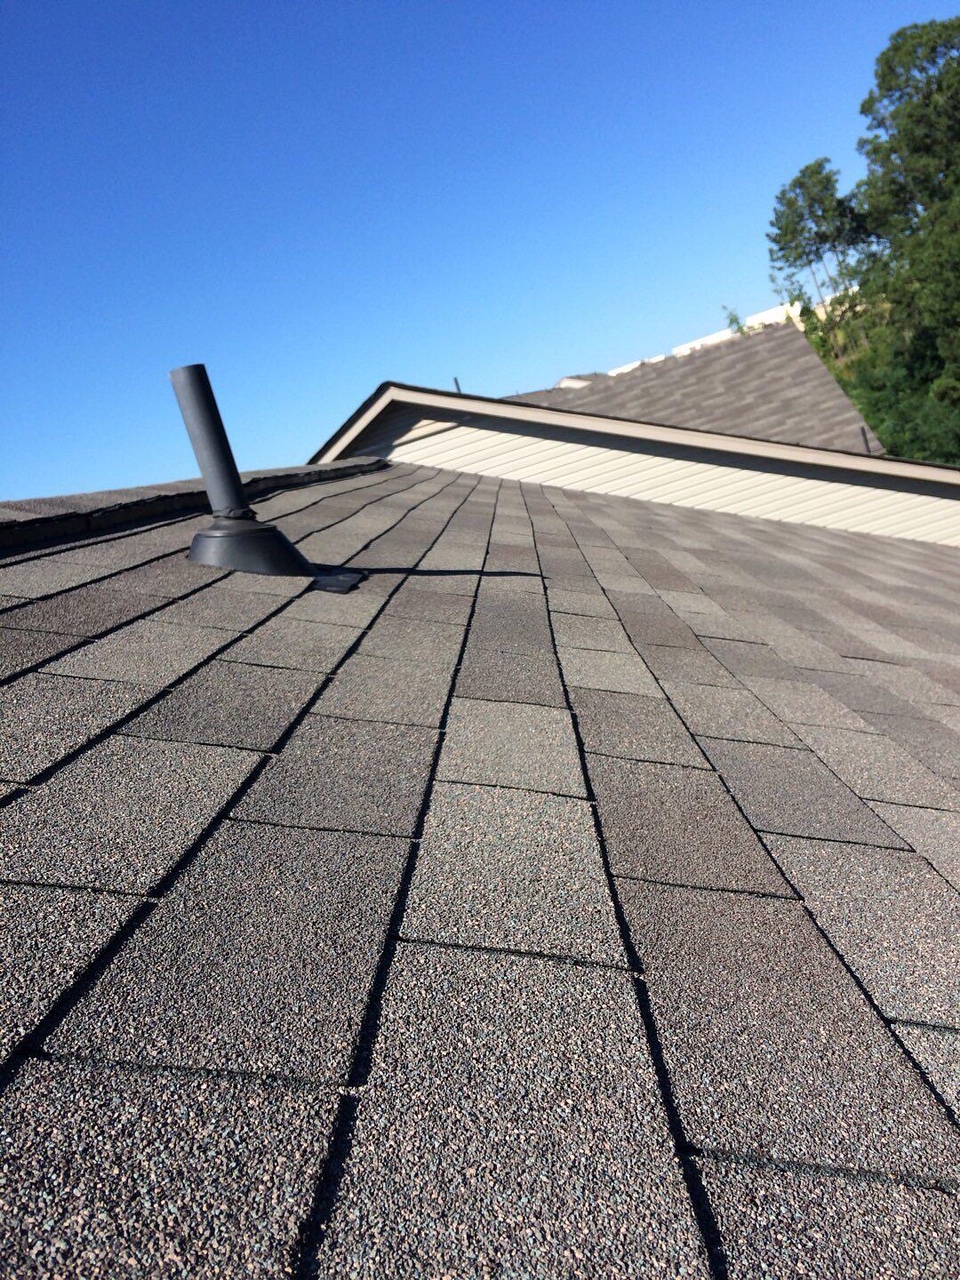 Roofing Repair or Replacement